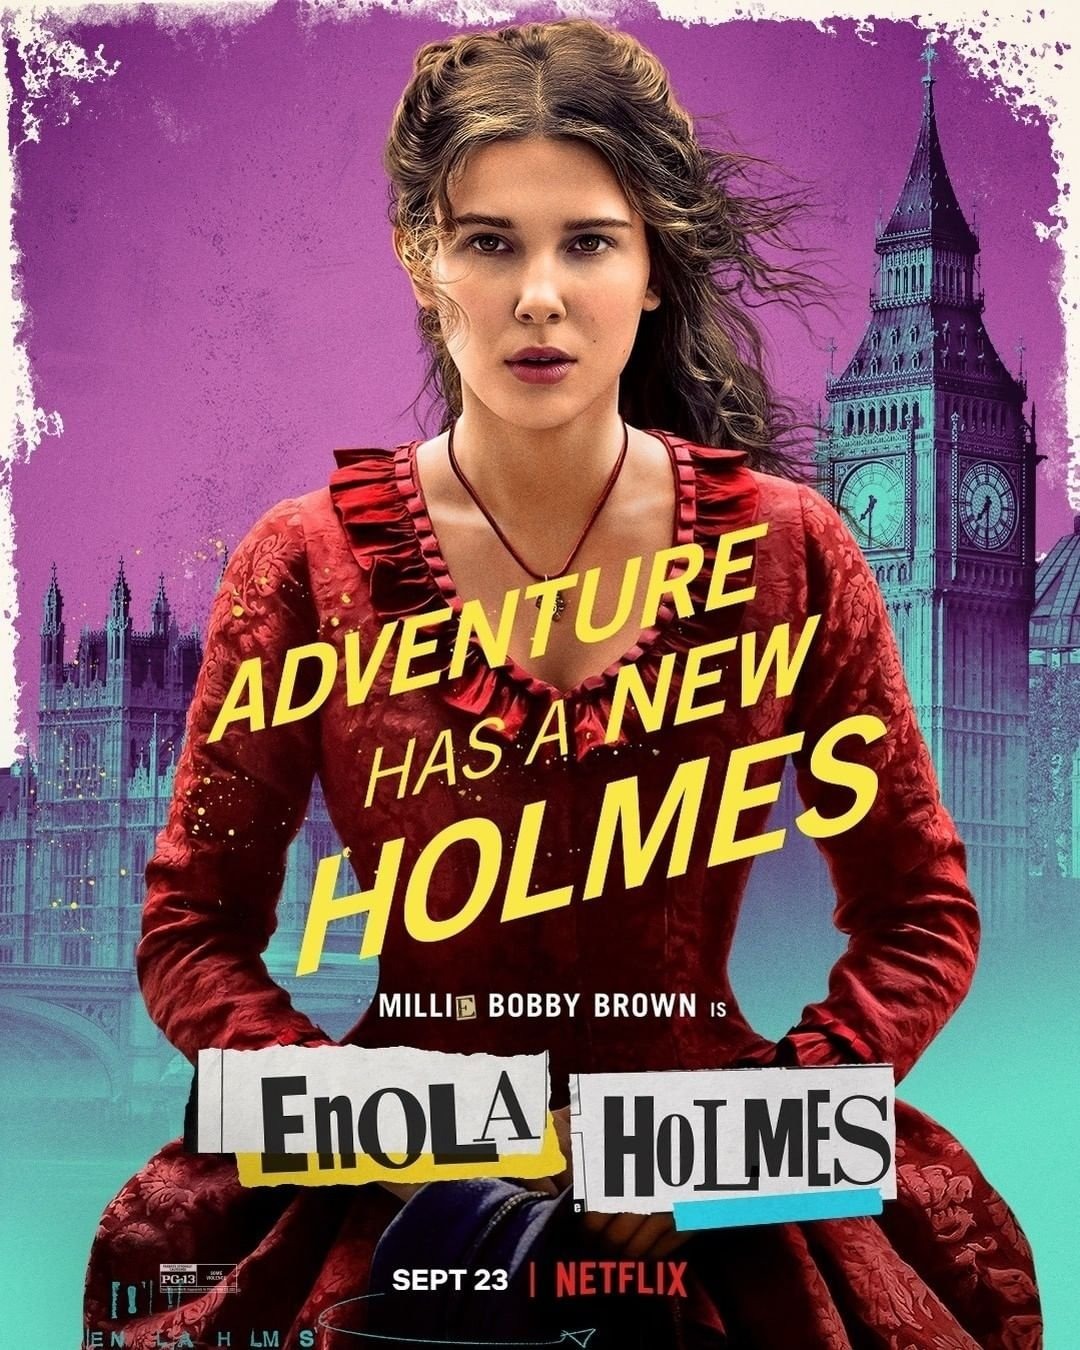 Extra Large TV Poster Image for Enola Holmes (#2 of 9)